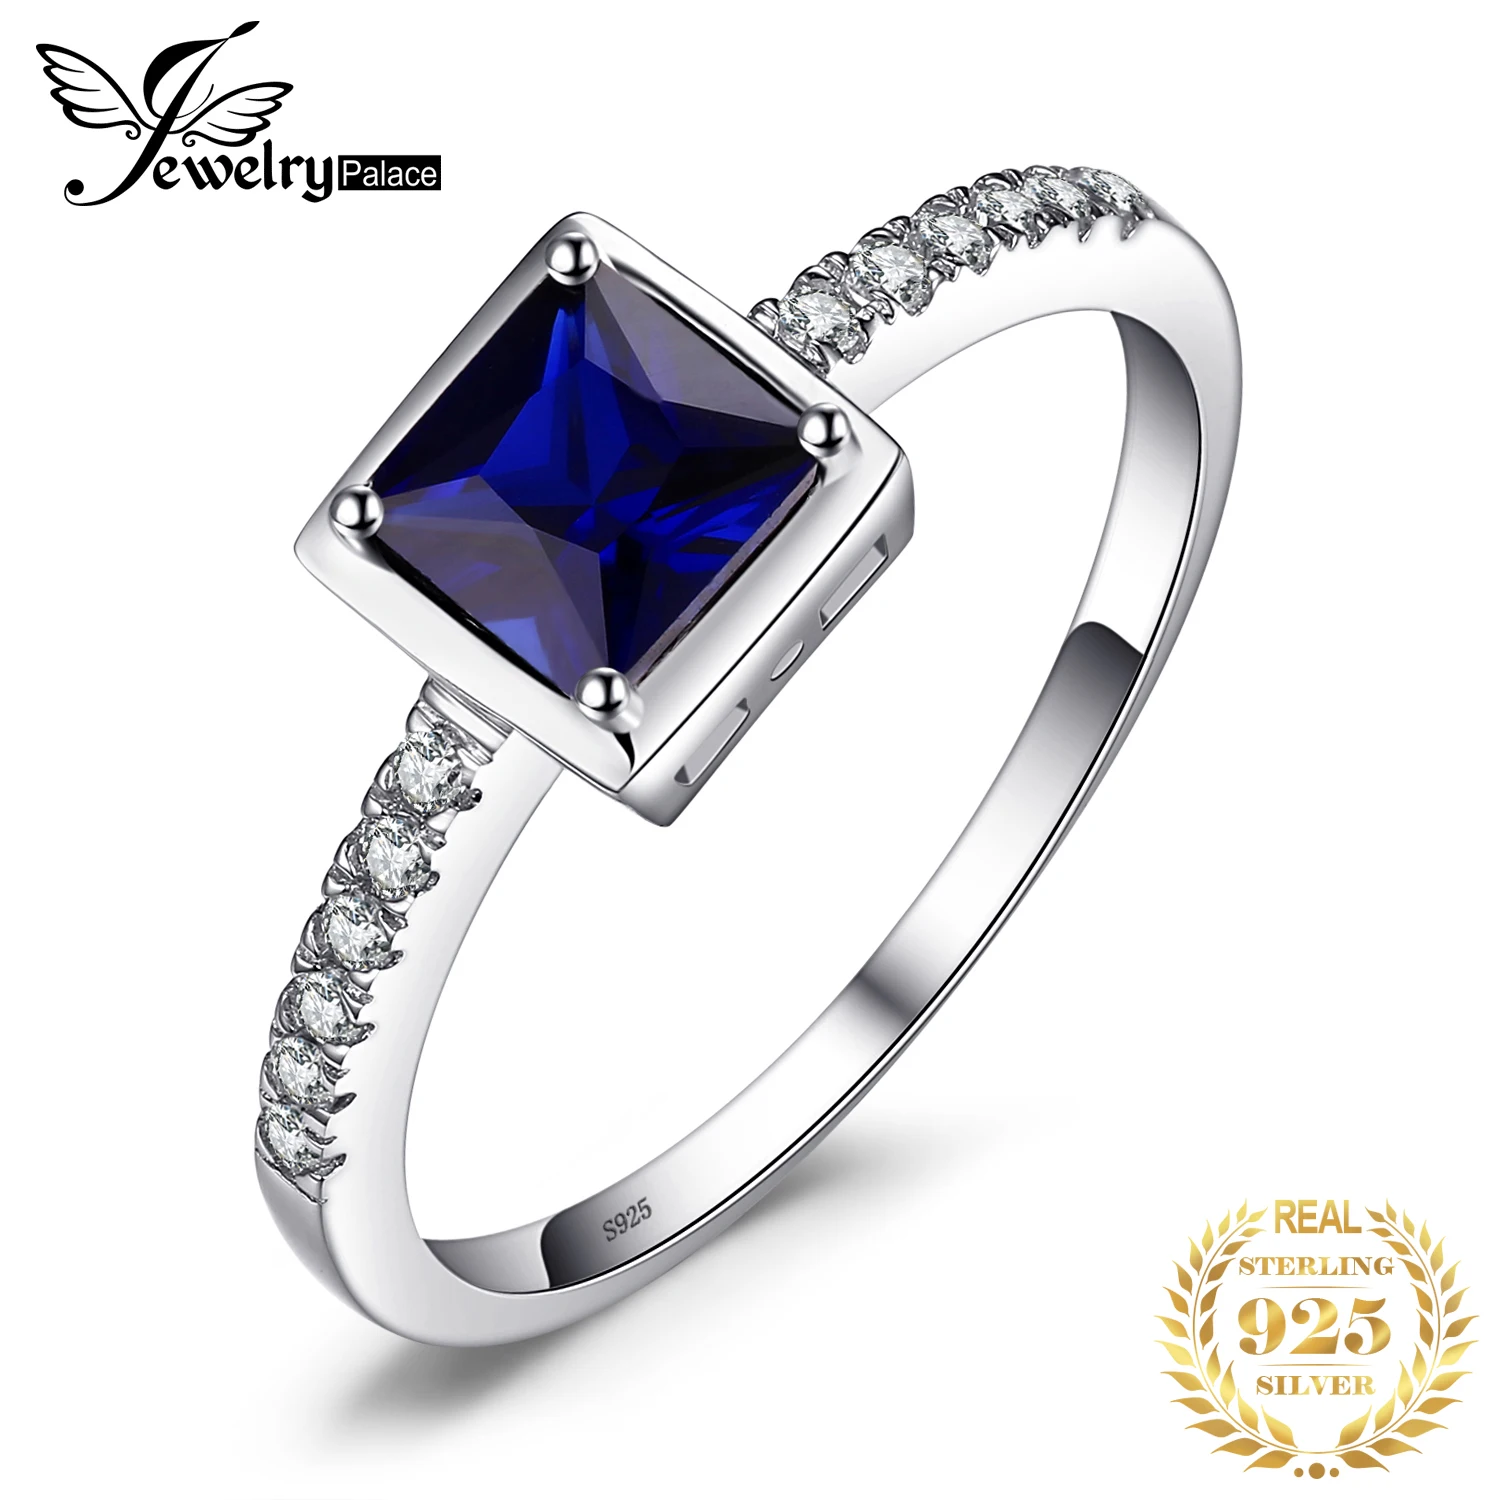 JewelryPalace Square Created Blue Sapphire 925 Sterling Silver Solitaire Ring for Women Fashion Gemstone Engagement Wedding Gift